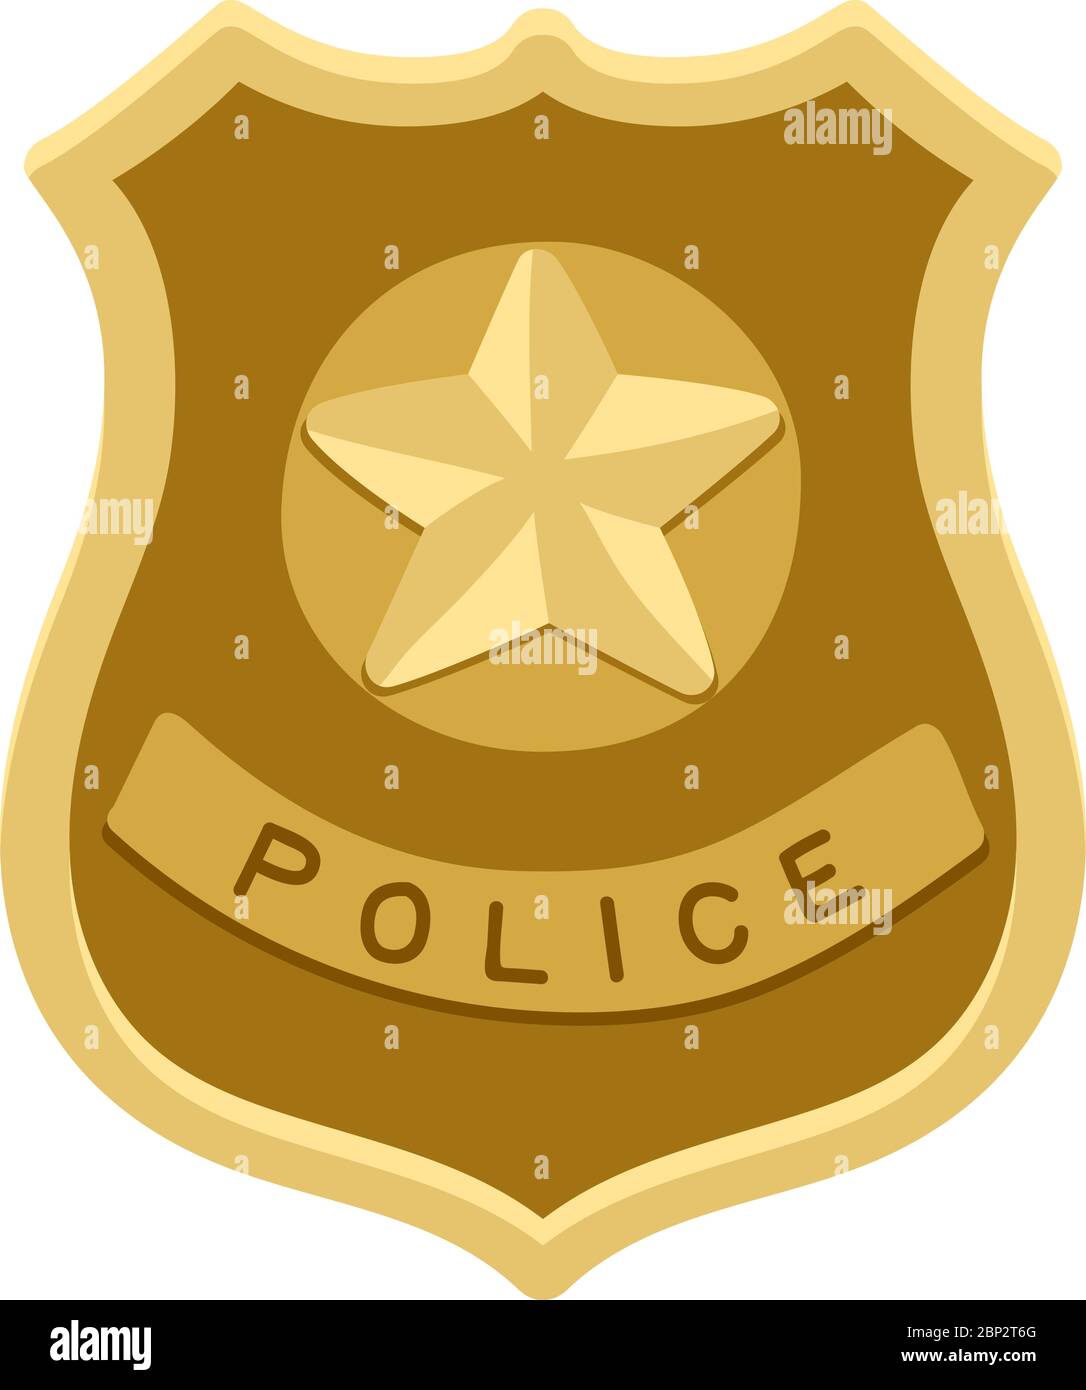 Police badge icon isolated on white background, vector illustration Stock Vector